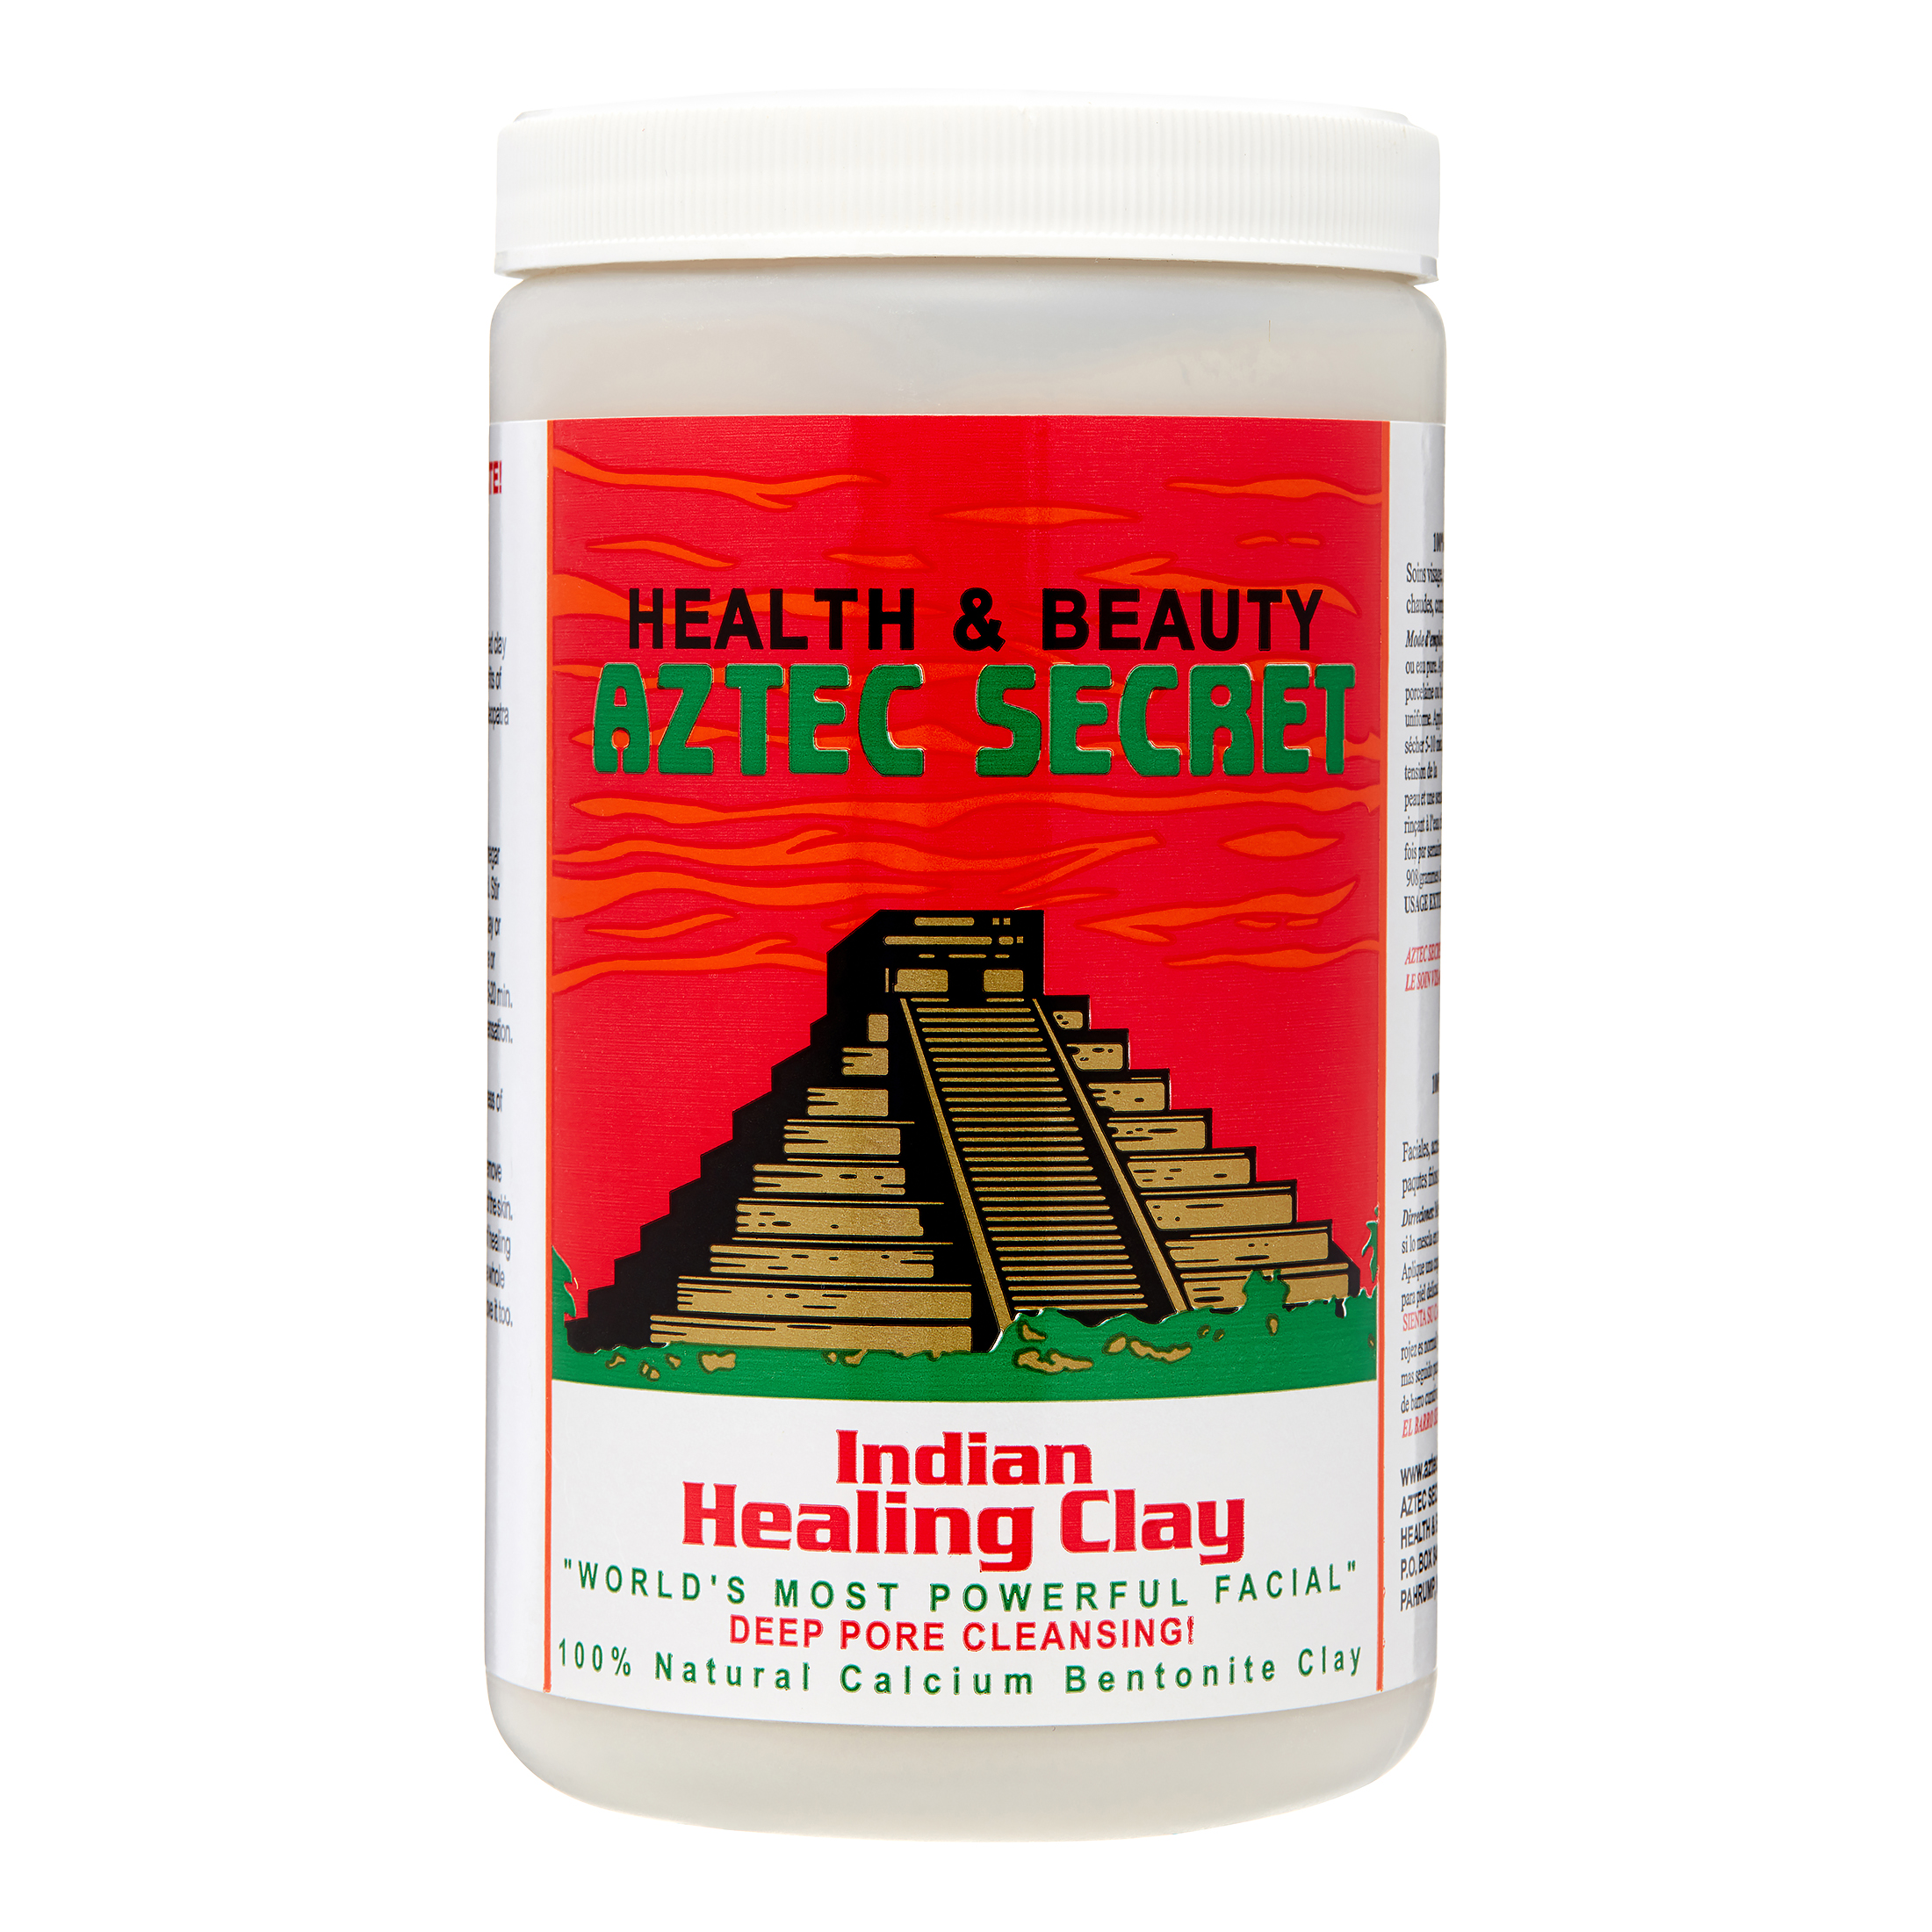 Aztec Secret Indian Healing Clay, 2 Pound - image 1 of 7